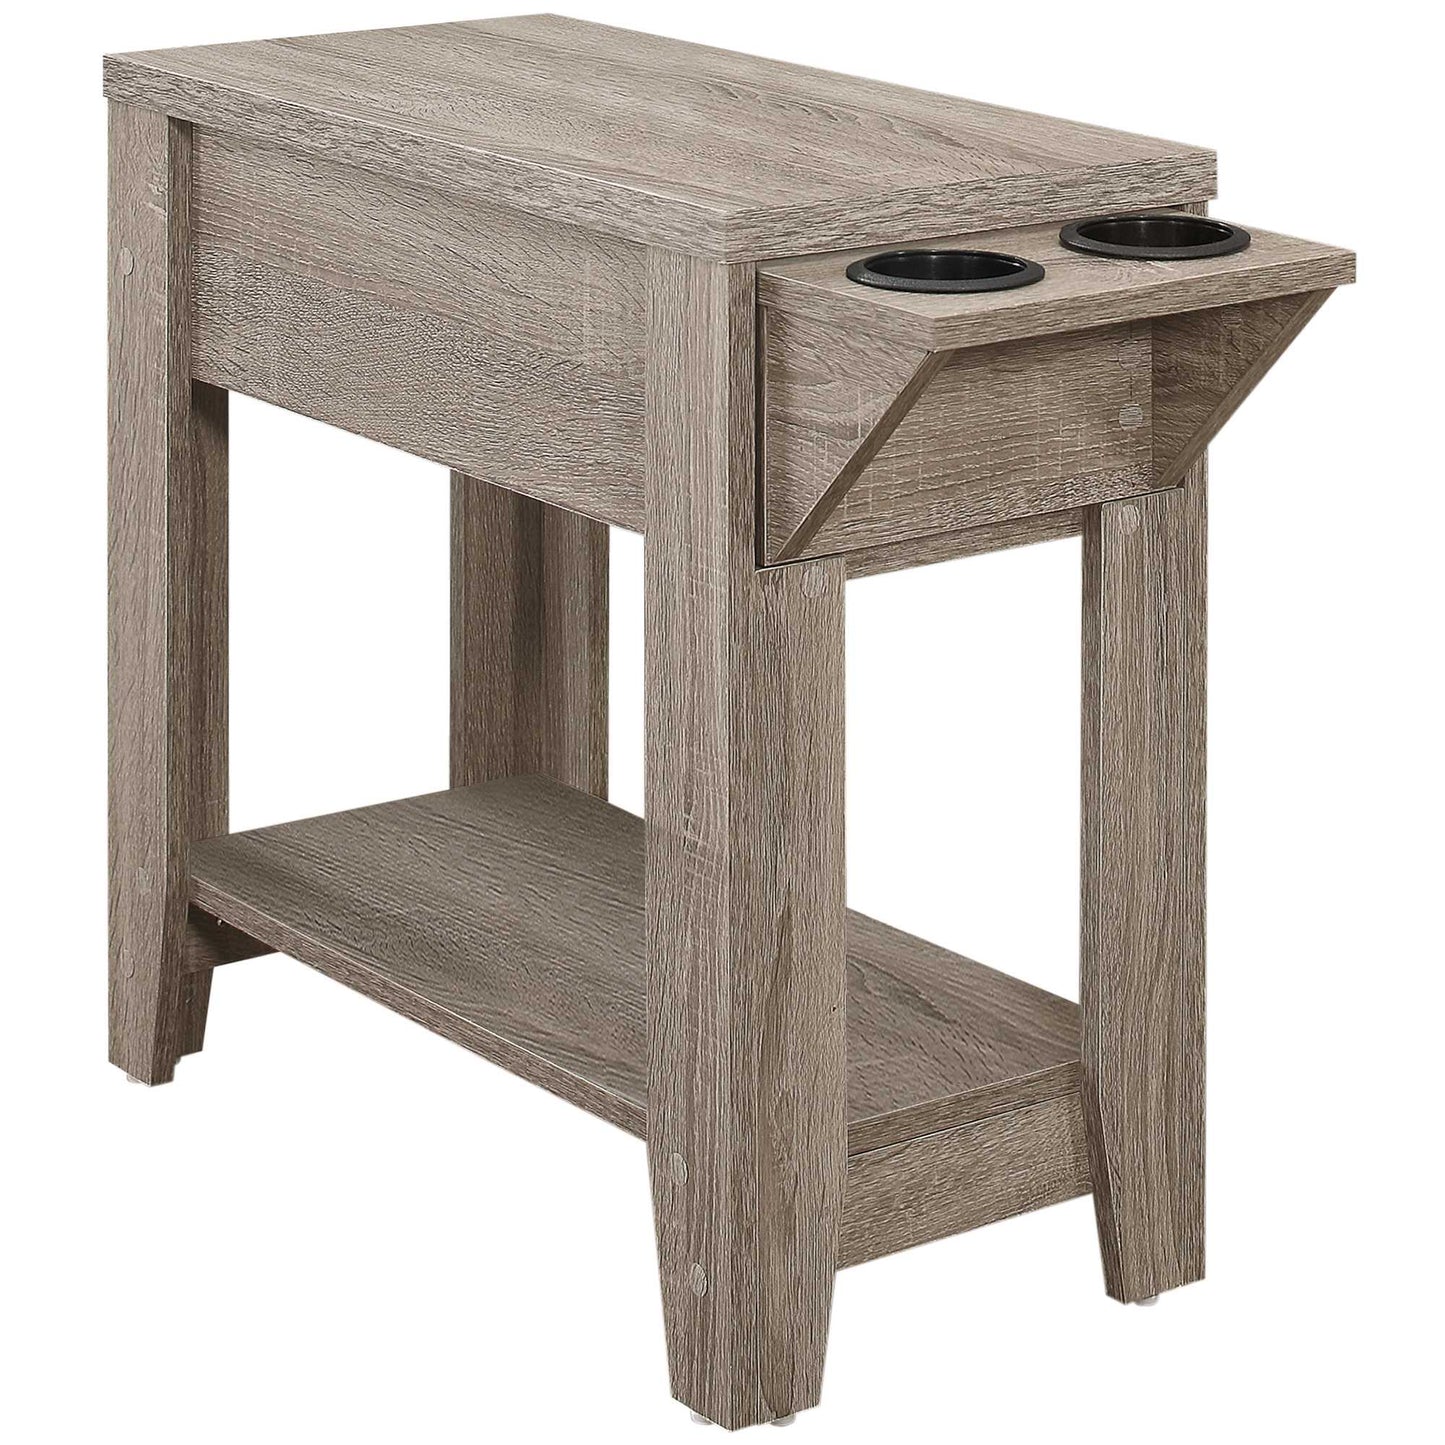 28.75" x 12" x 22.5" Taupe Finish Accent Table